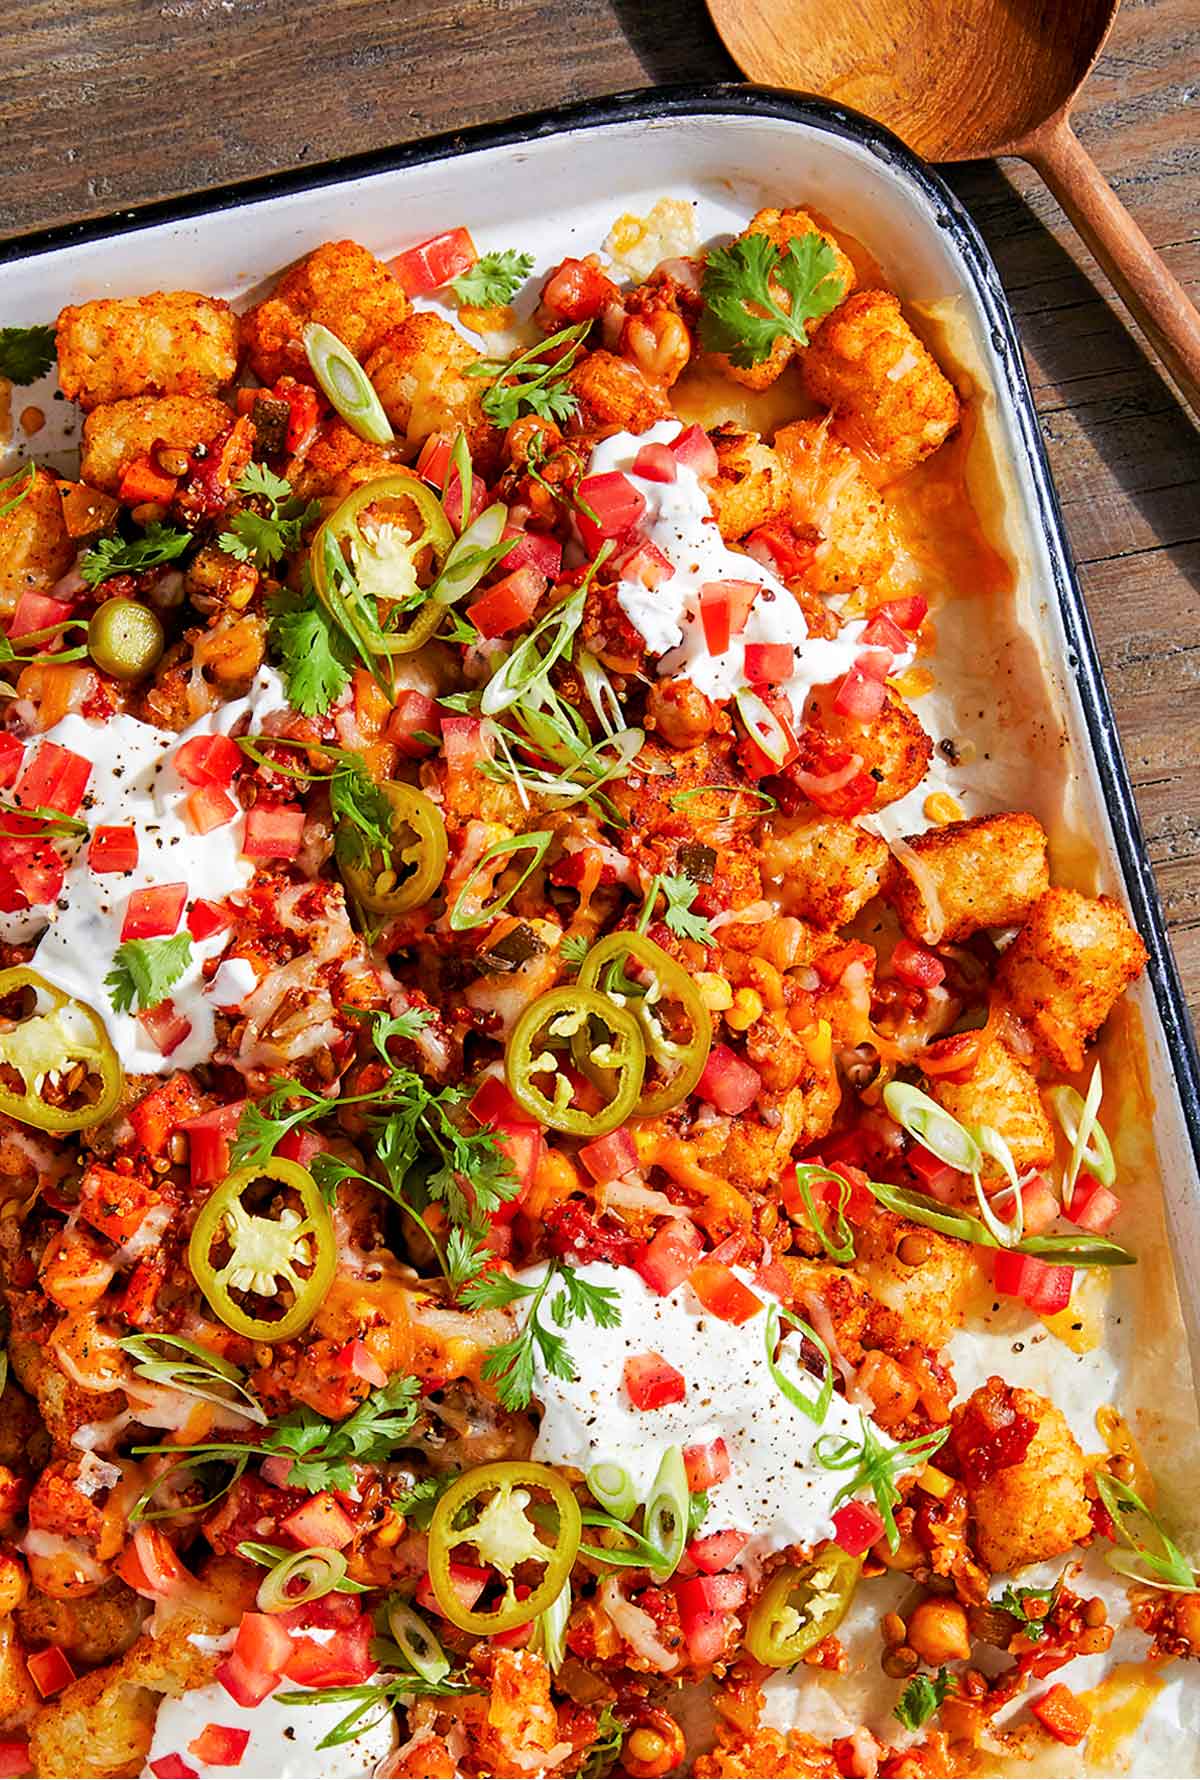 A large rectangle casserole pan, filled with tater tot nachos topped with sour cream, tomatoes, sour cream, and jalapeños. A wooden serving spoon lays beside the dish.